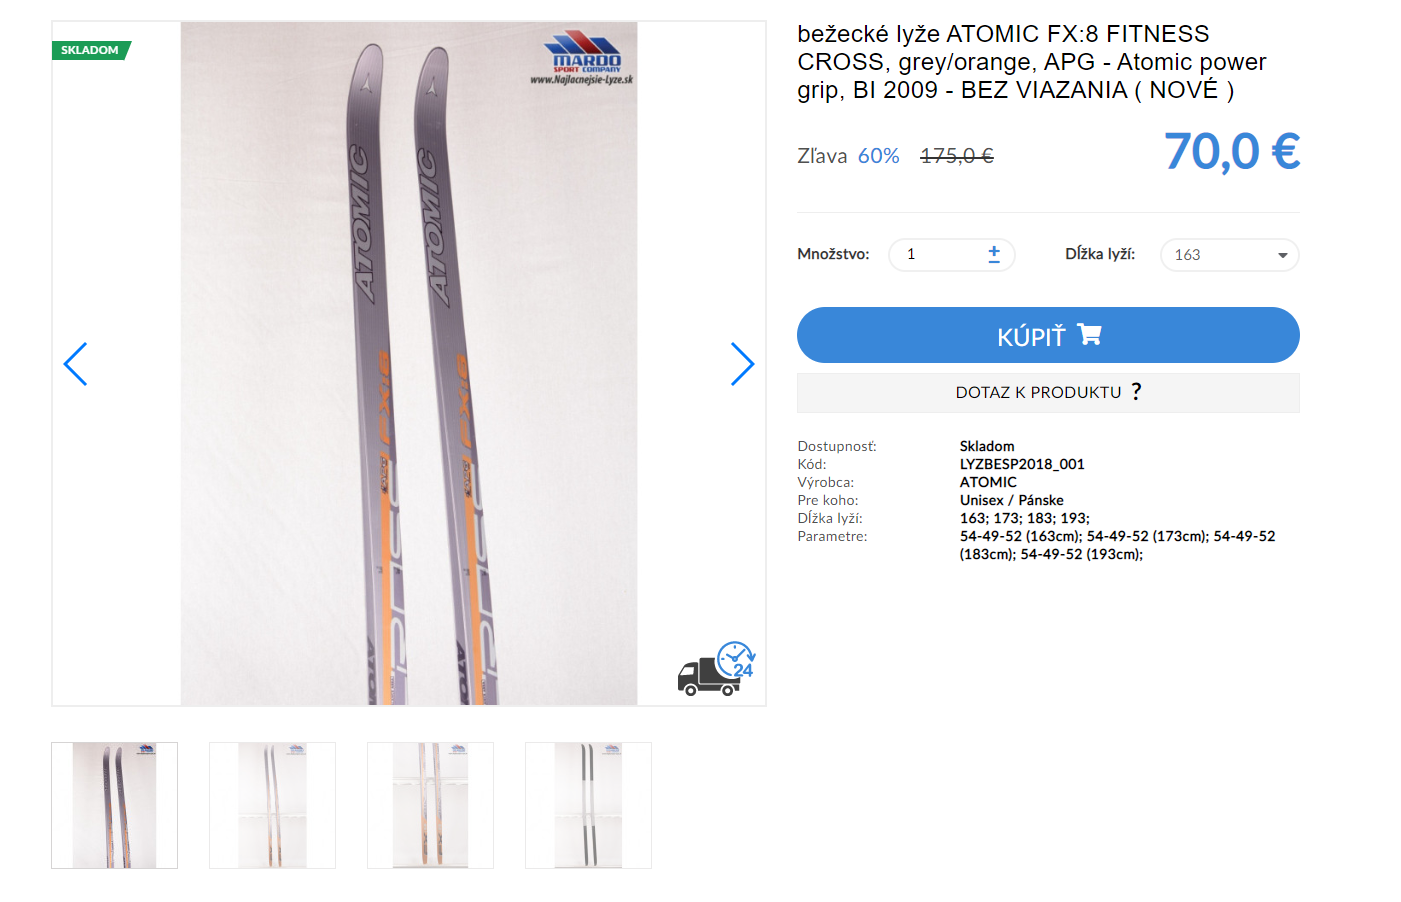 Particular product - cheapest skis